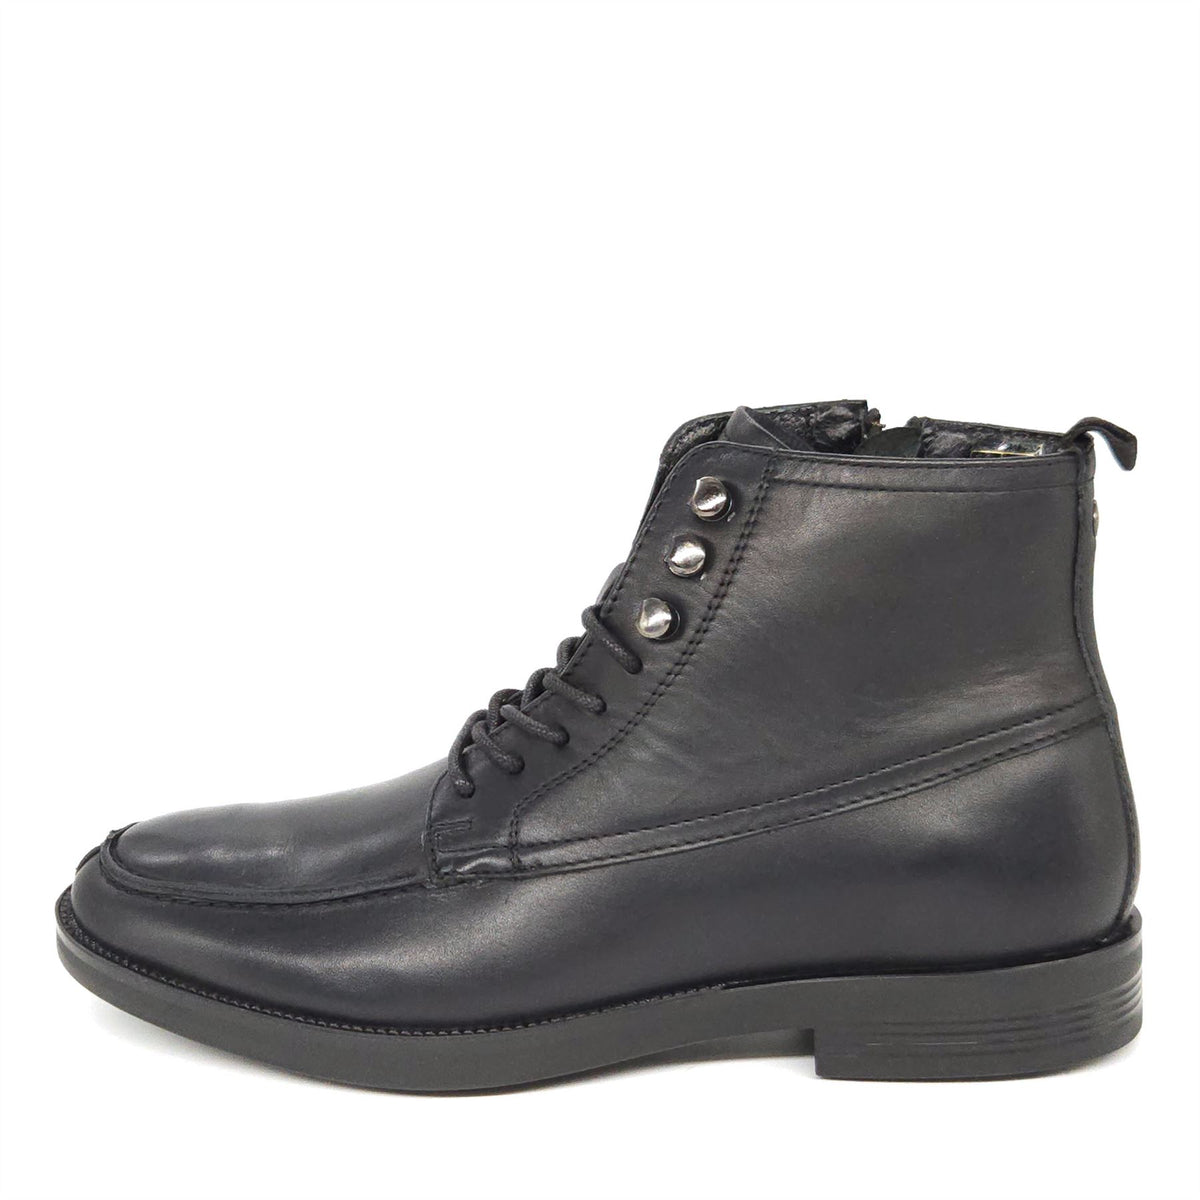 Ealing Lace Up Boots